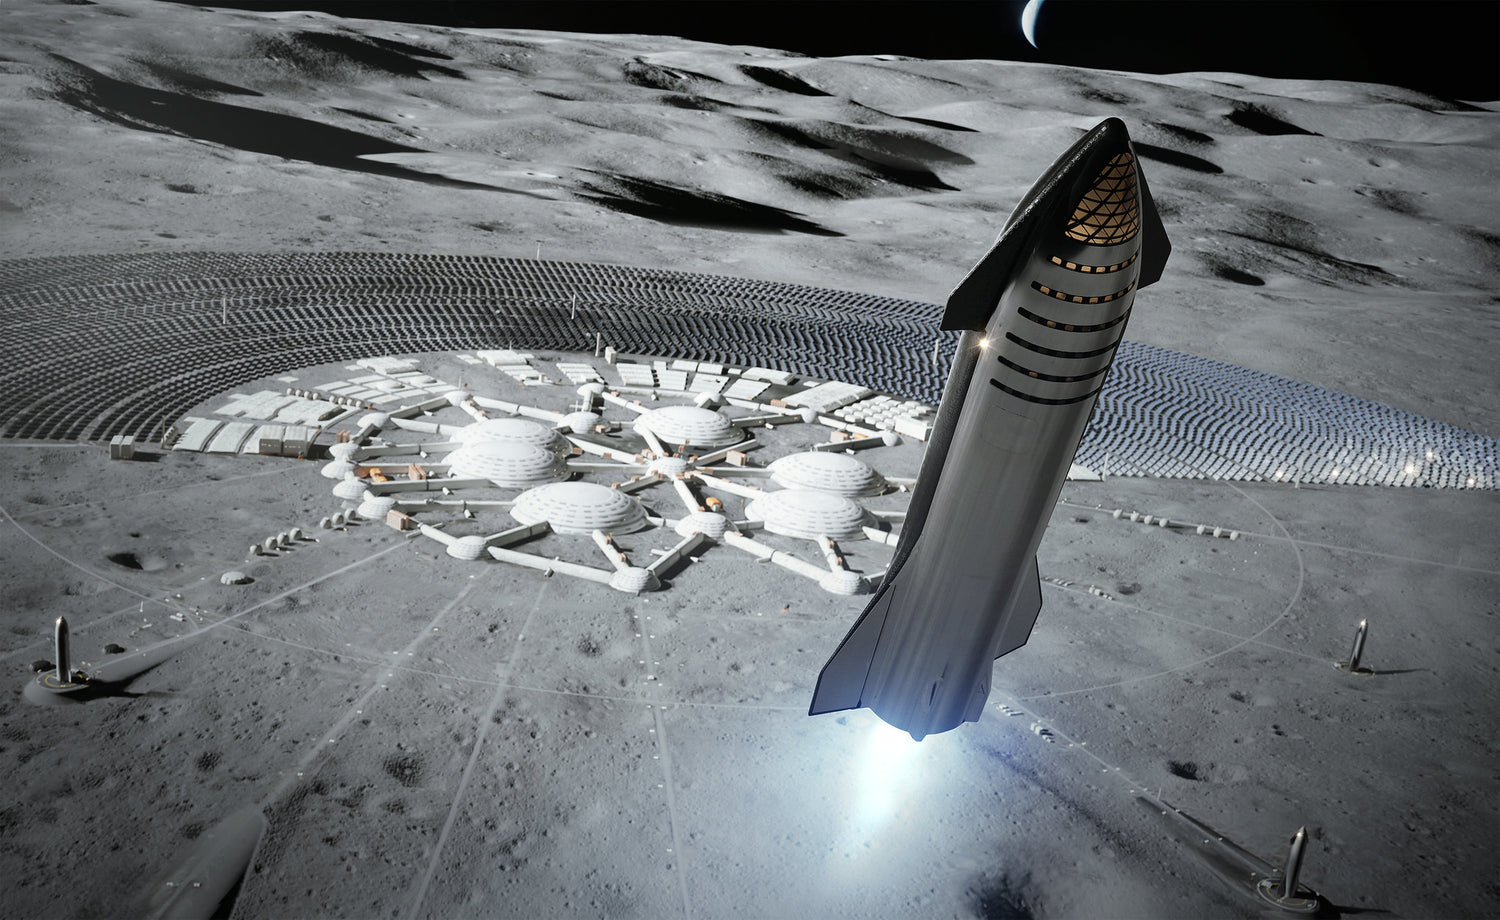 NASA Awards Five U.S. Companies Contracts To Develop Moon Lander Concepts –Including SpaceX & Blue Origin